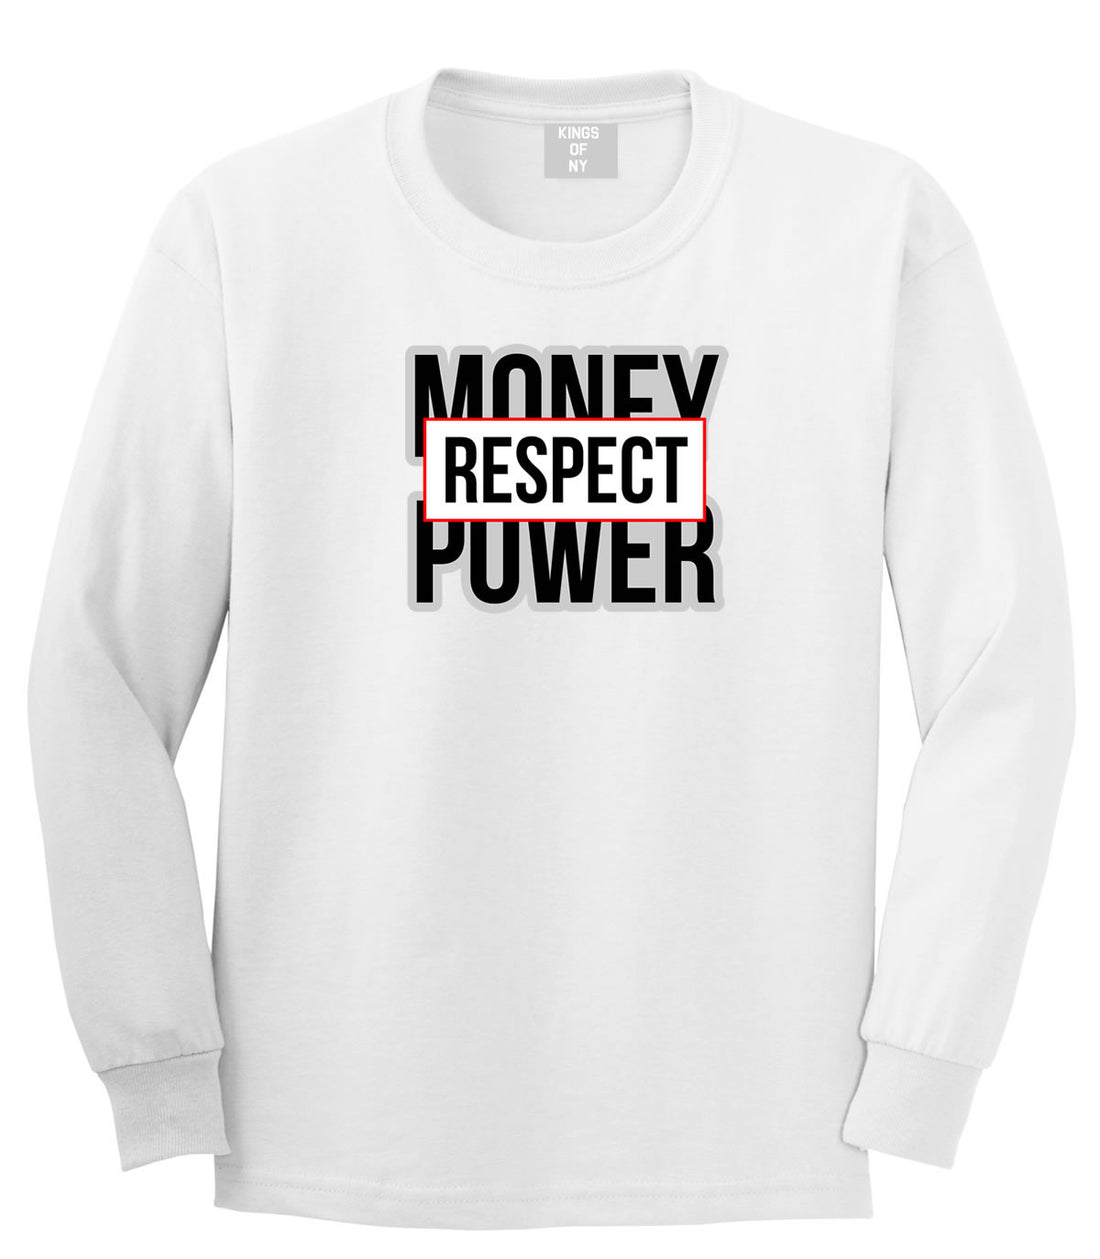 Money Power Respect Long Sleeve T-Shirt in White By Kings Of NY